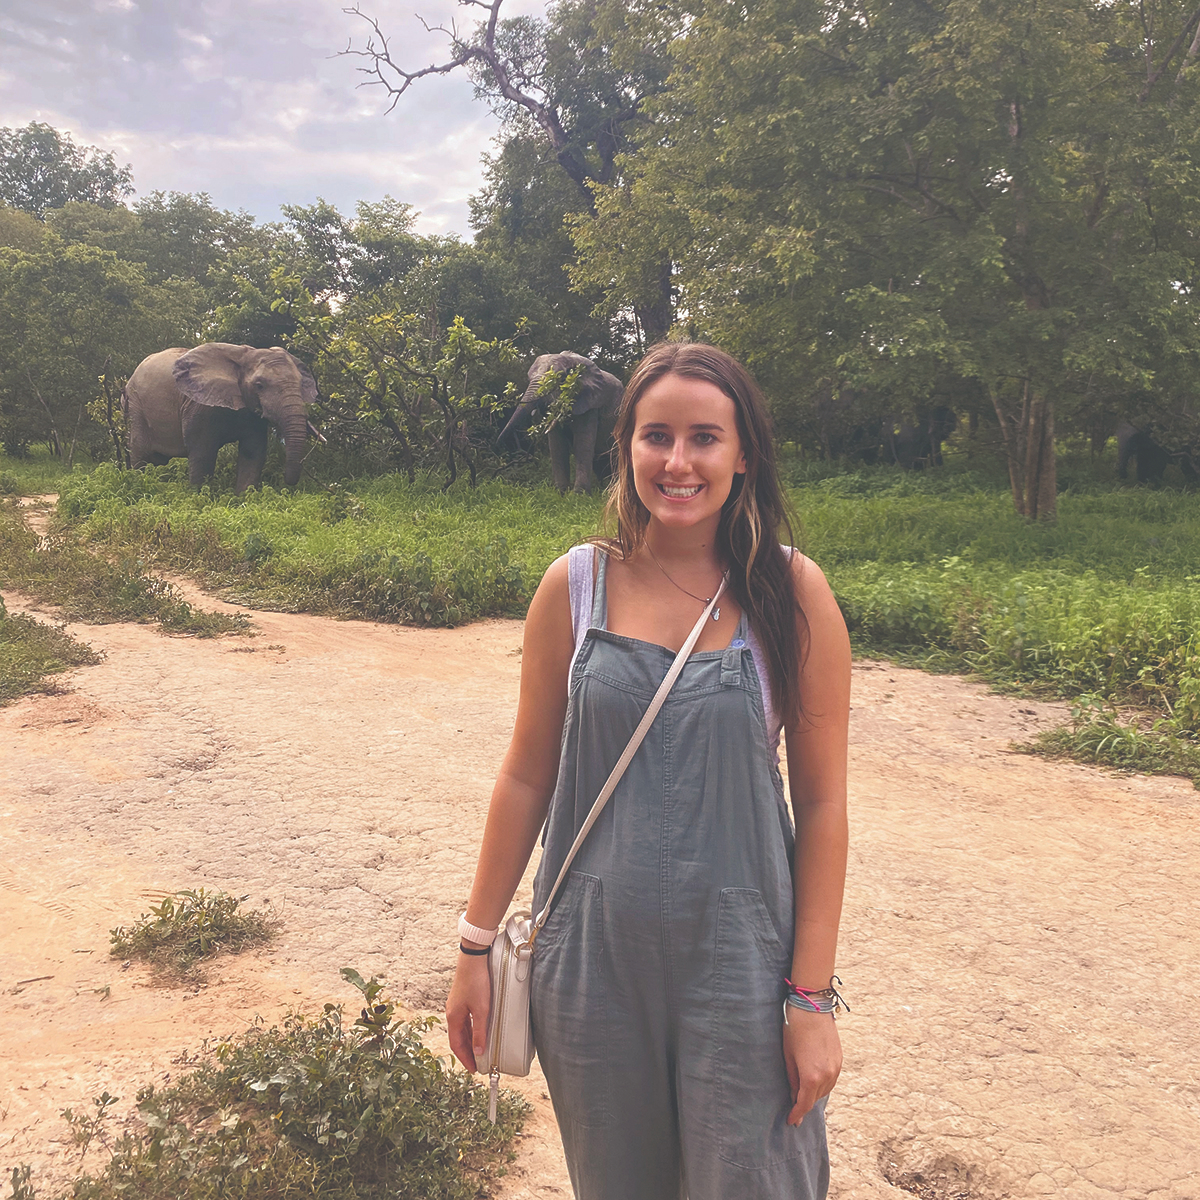 Ariel Caldon stands in front of elephants in the bush